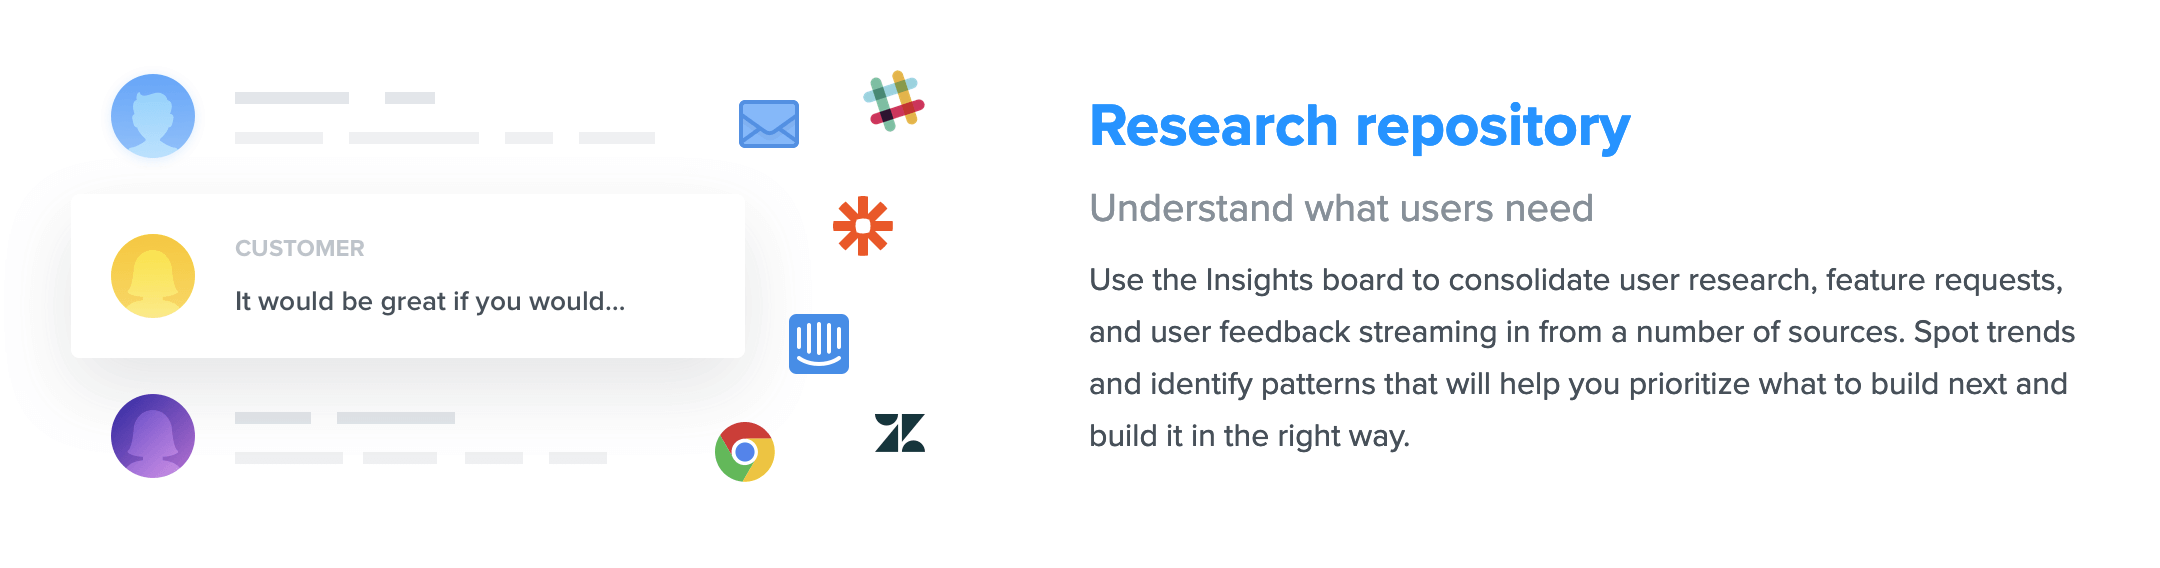 Place insights into single repository